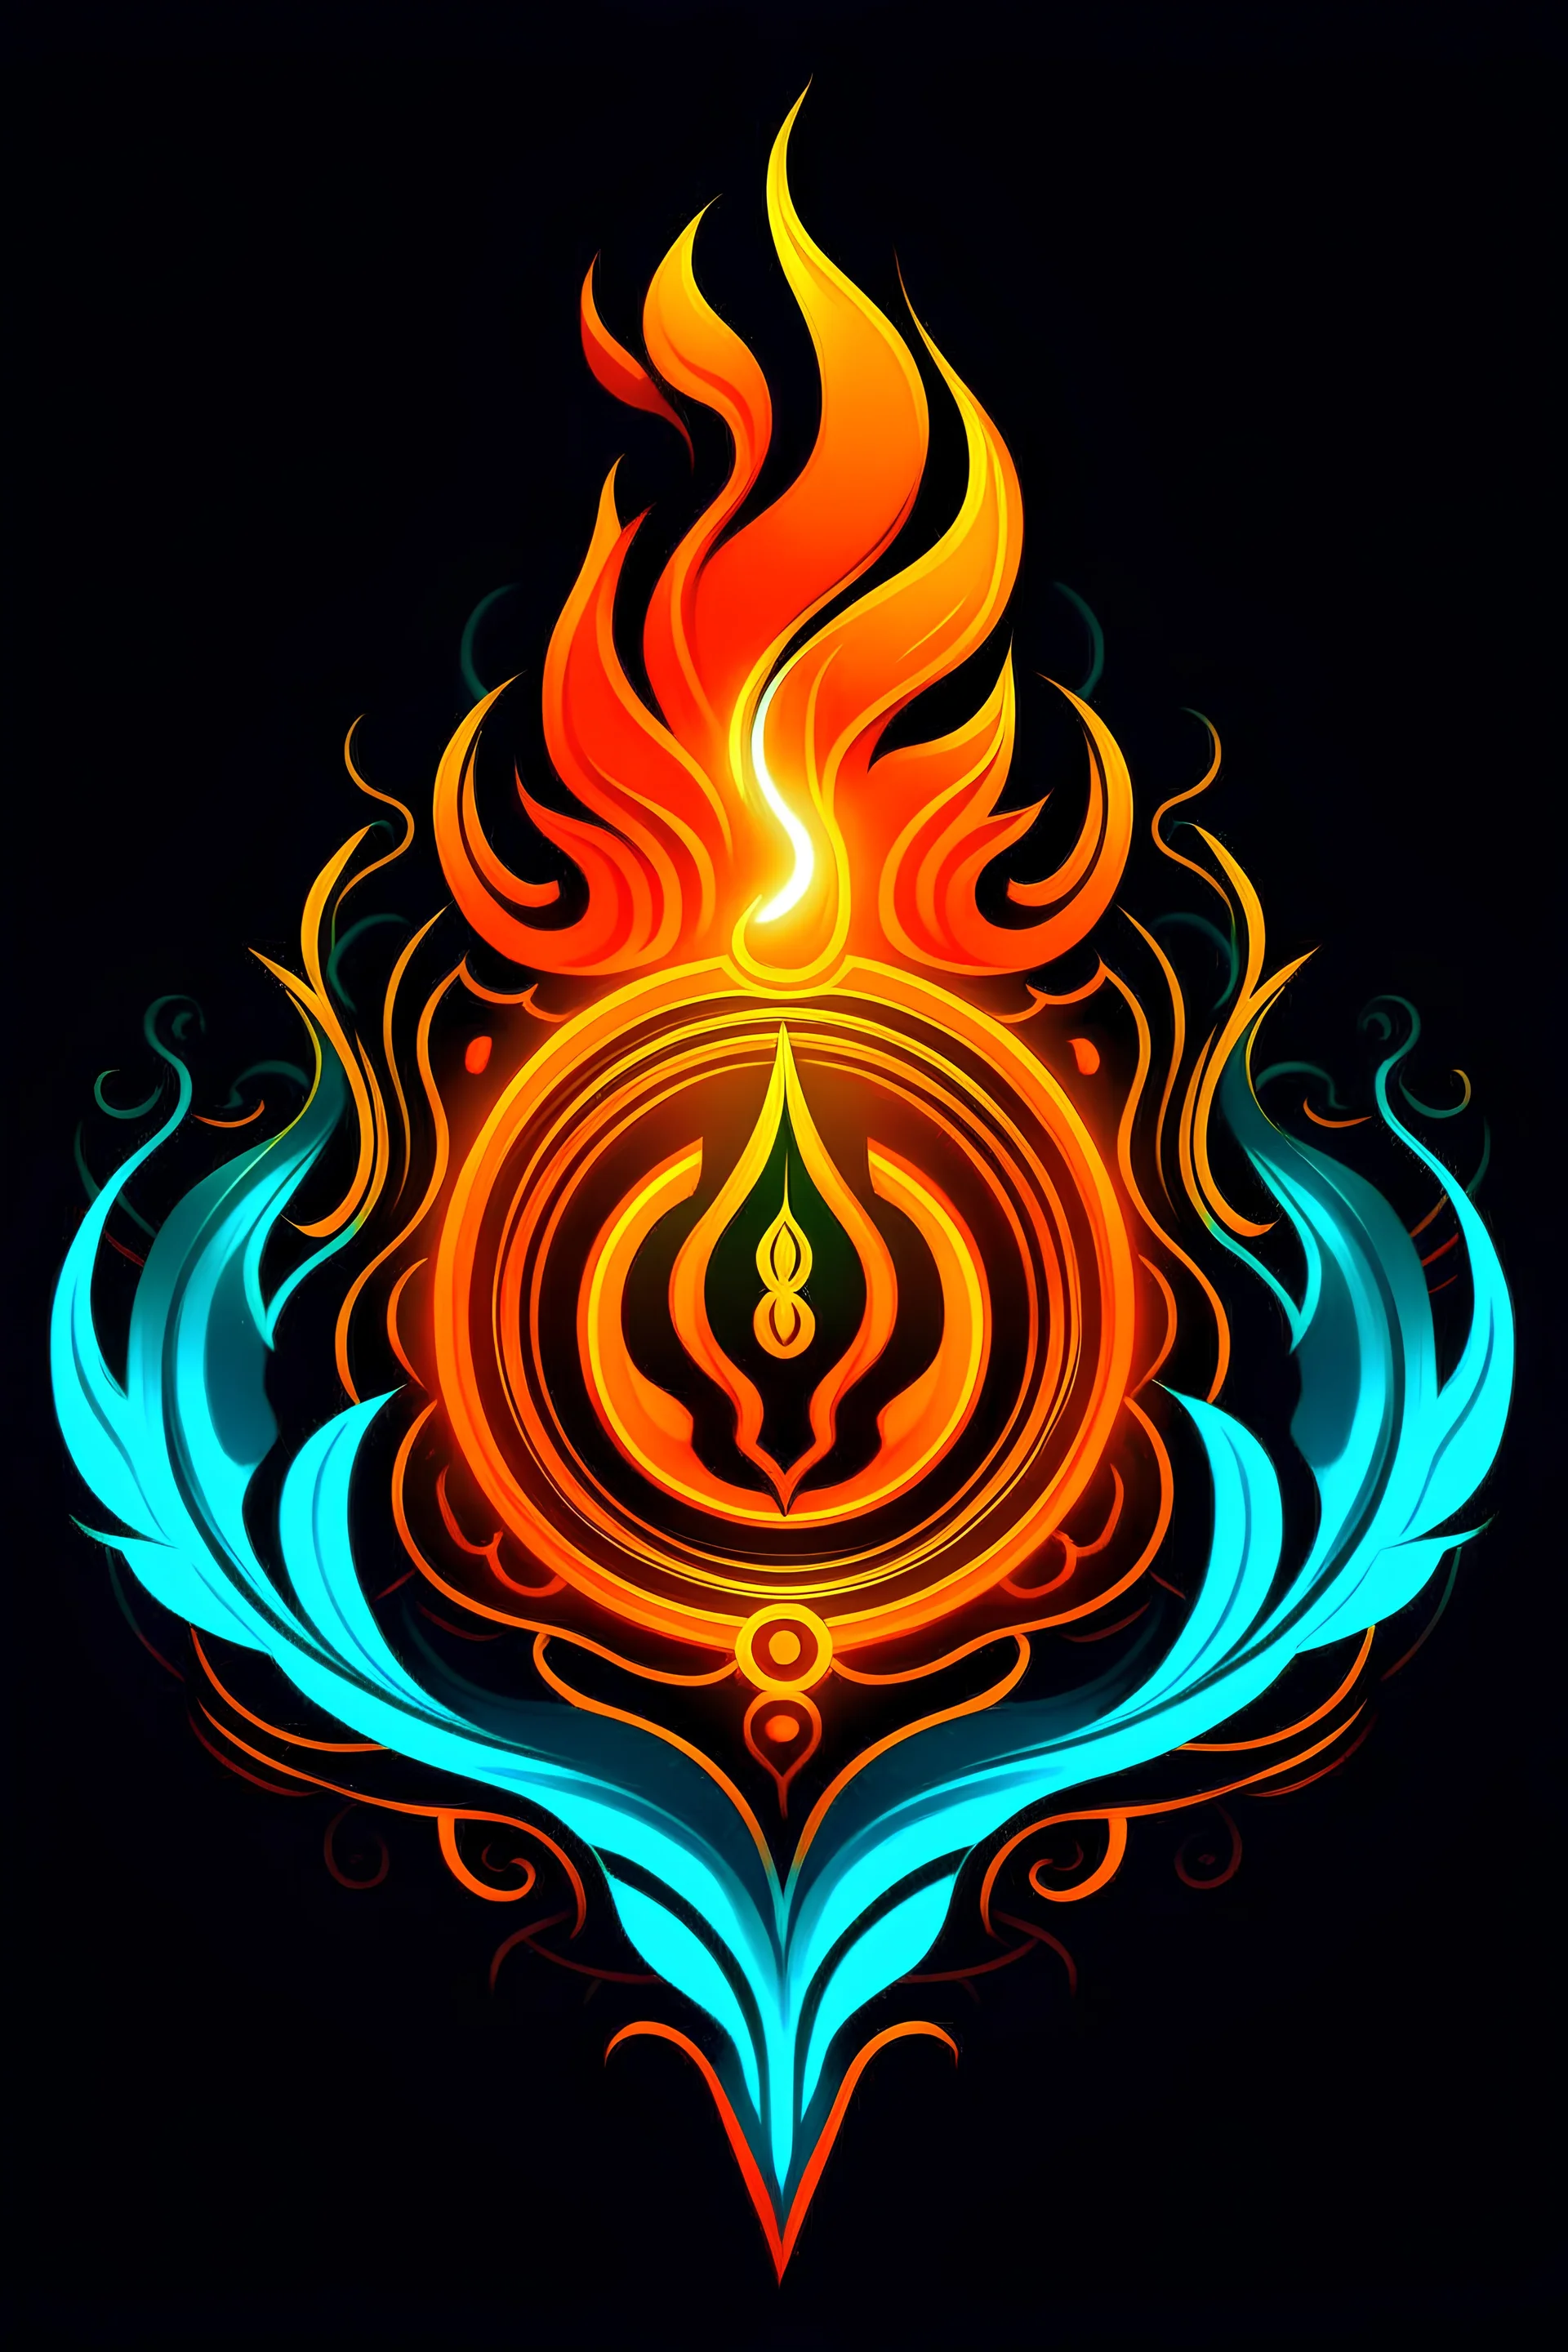 The Trishul (trident) symbol of Shiva, but inverted with a fiery glow around the prongs. Design Style: Classic with a twist, bold colors.